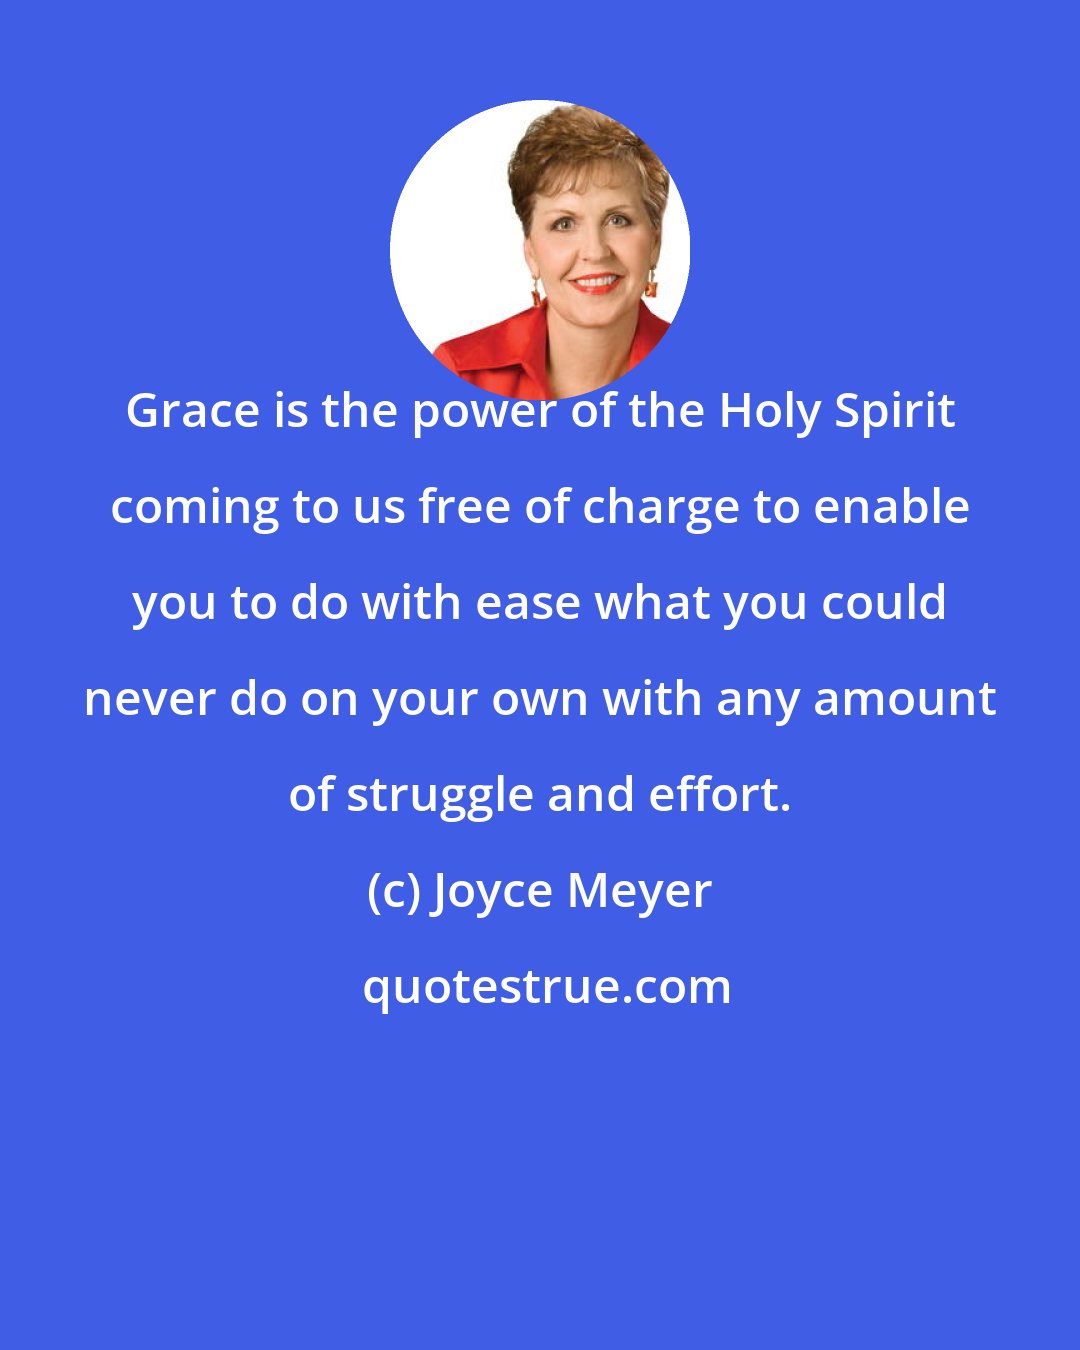 Joyce Meyer: Grace is the power of the Holy Spirit coming to us free of charge to enable you to do with ease what you could never do on your own with any amount of struggle and effort.